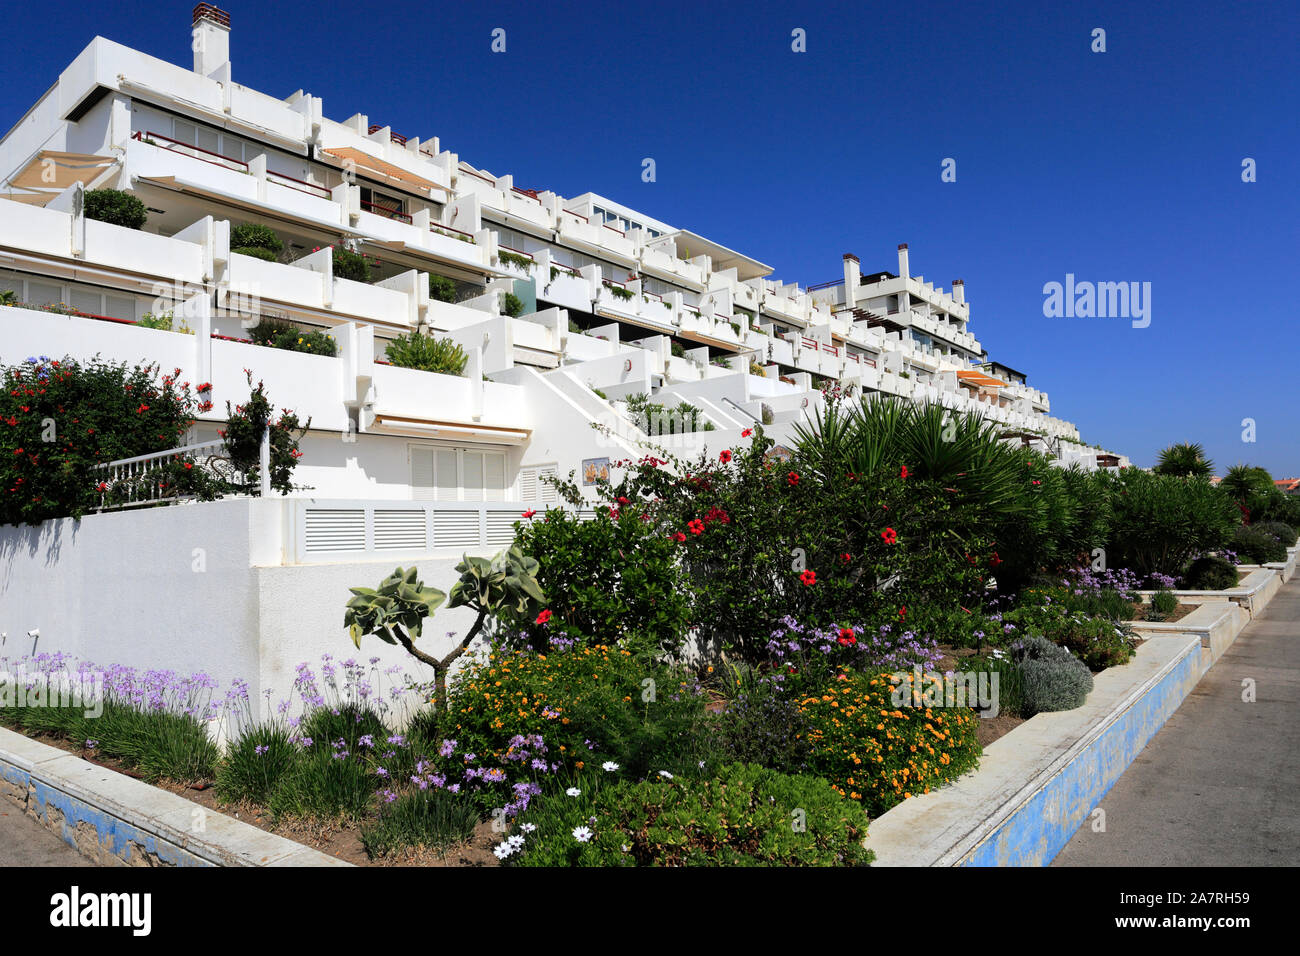 View of Hotels in Vilamoura town, Algarve, Southern Portugal, Europe Stock Photo